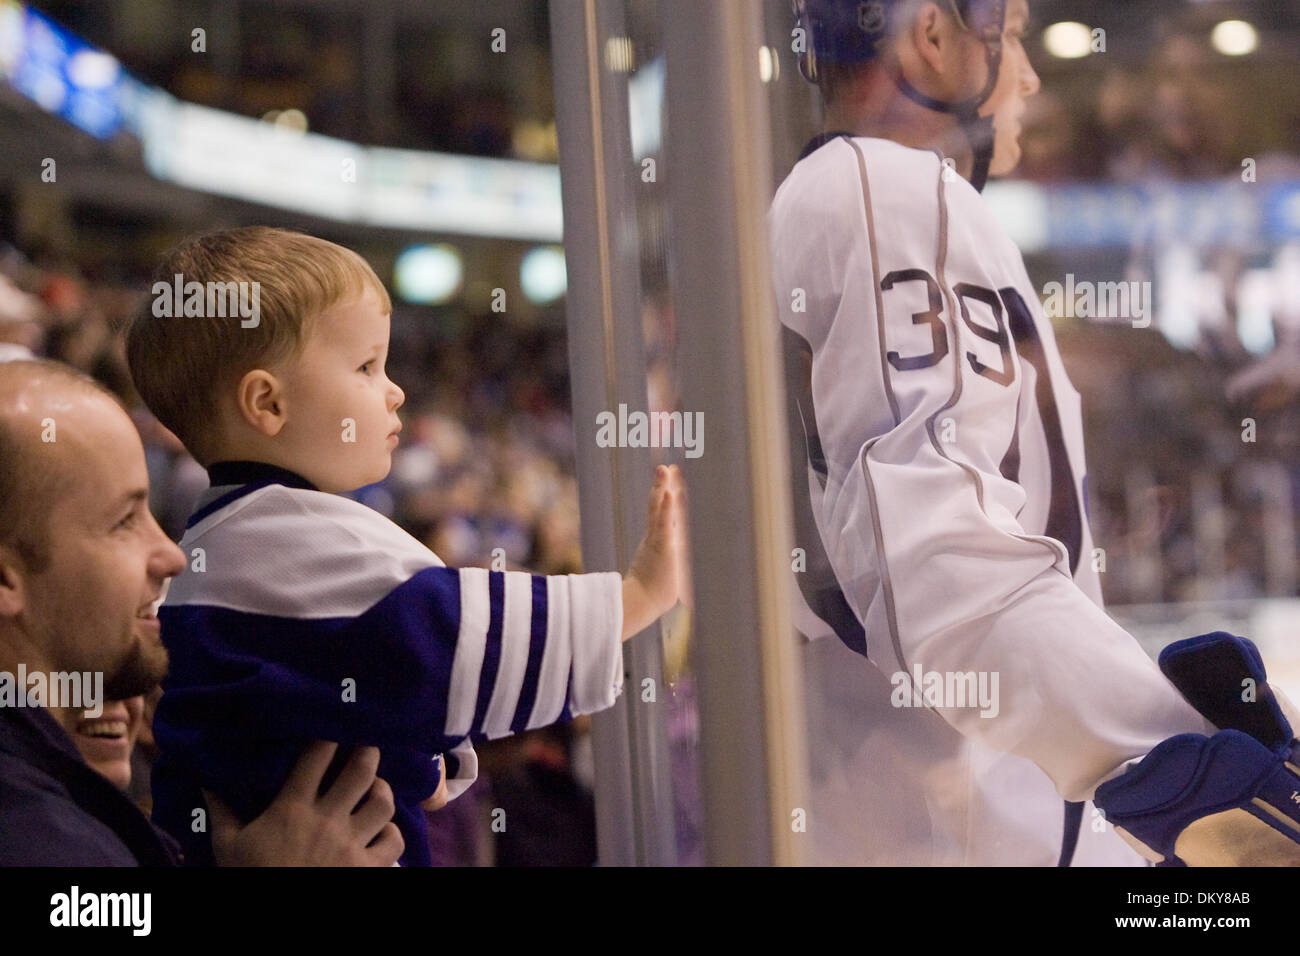 Feb. 28, 2010 - Oshawa, Ontario, Canada - 28 February 2010: a young hockey fan watches members of the Toronto Maple Leafs practice and entertain a sold-out crowd at the GM Centre in Oshawa, Ontario. (Credit Image: © Steve Dormer/Southcreek Global/ZUMAPRESS.com) Stock Photo